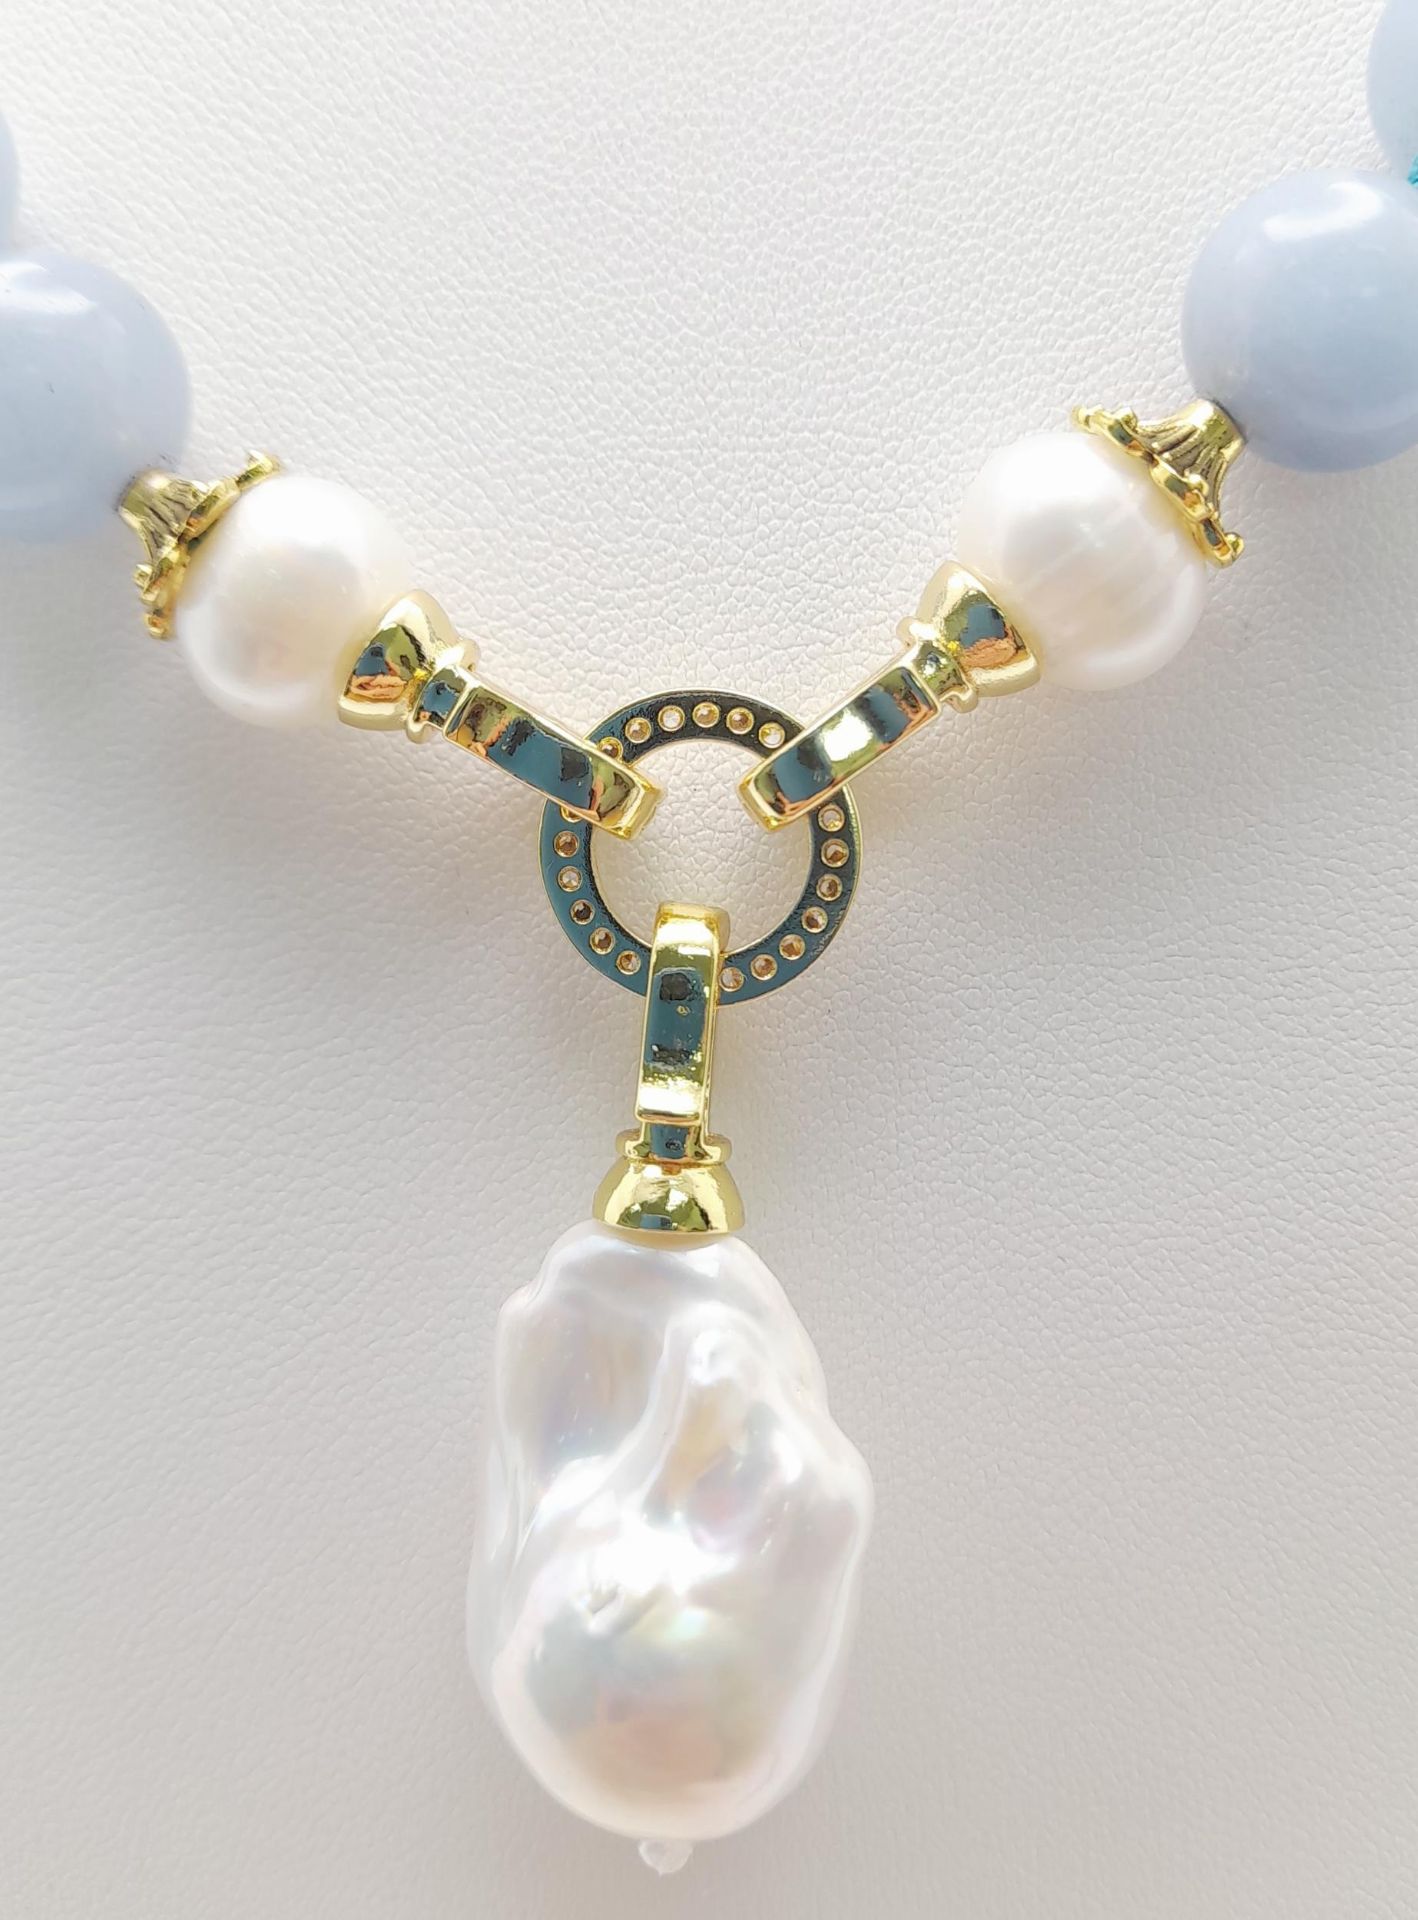 A Blue Aquamarine Beaded Necklace with a Hanging Keisha Baroque Pearl Pendant. Gilded clasp. White - Image 4 of 5